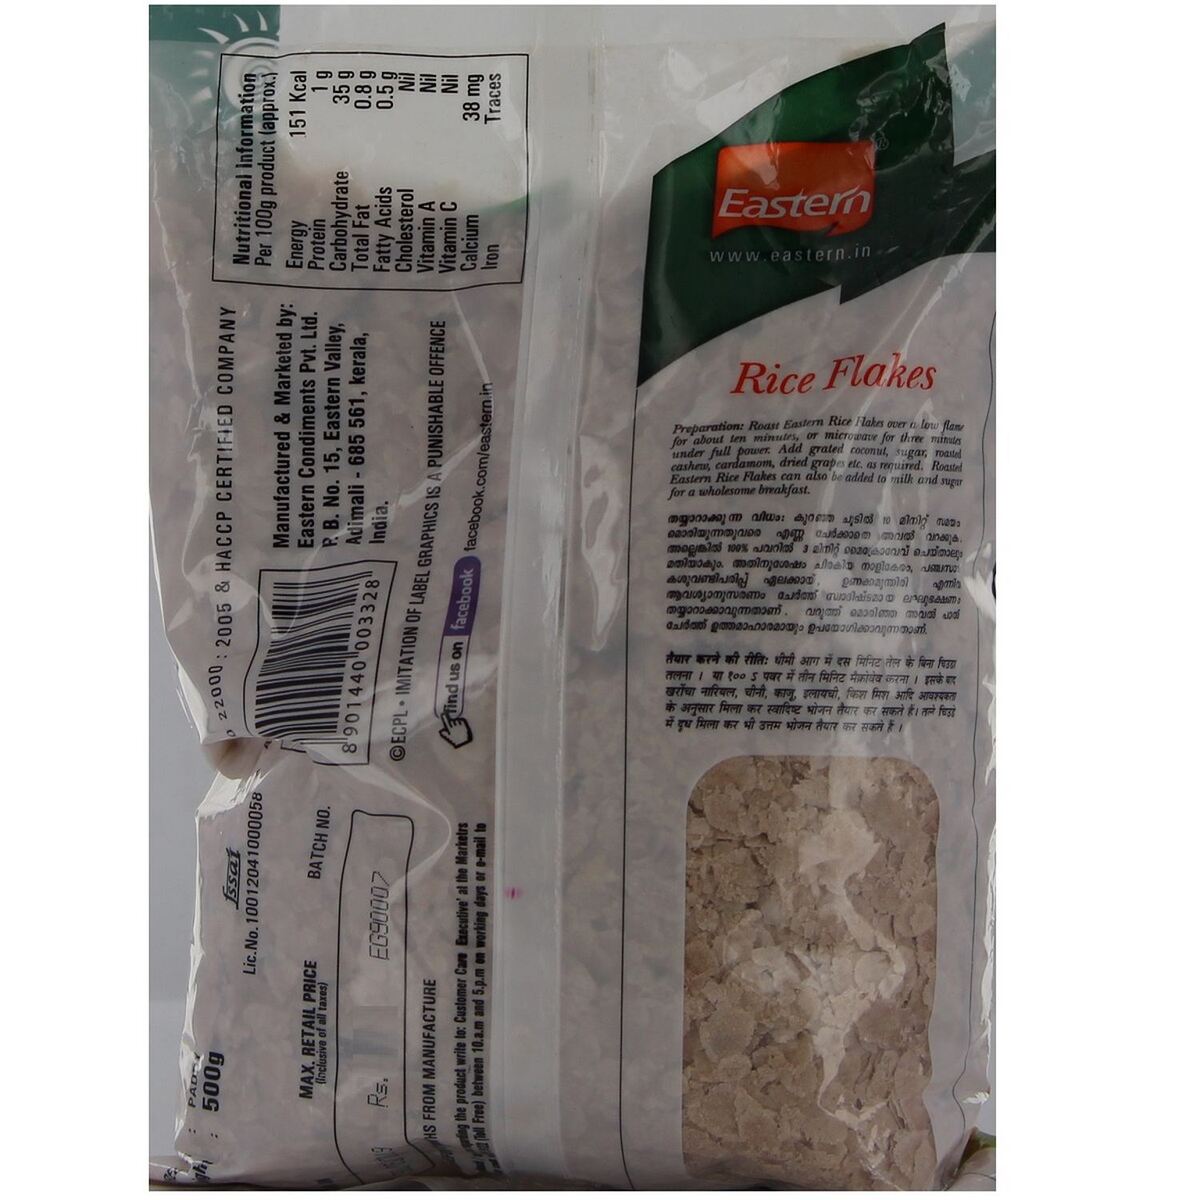 Eastern Rice Flakes 500g